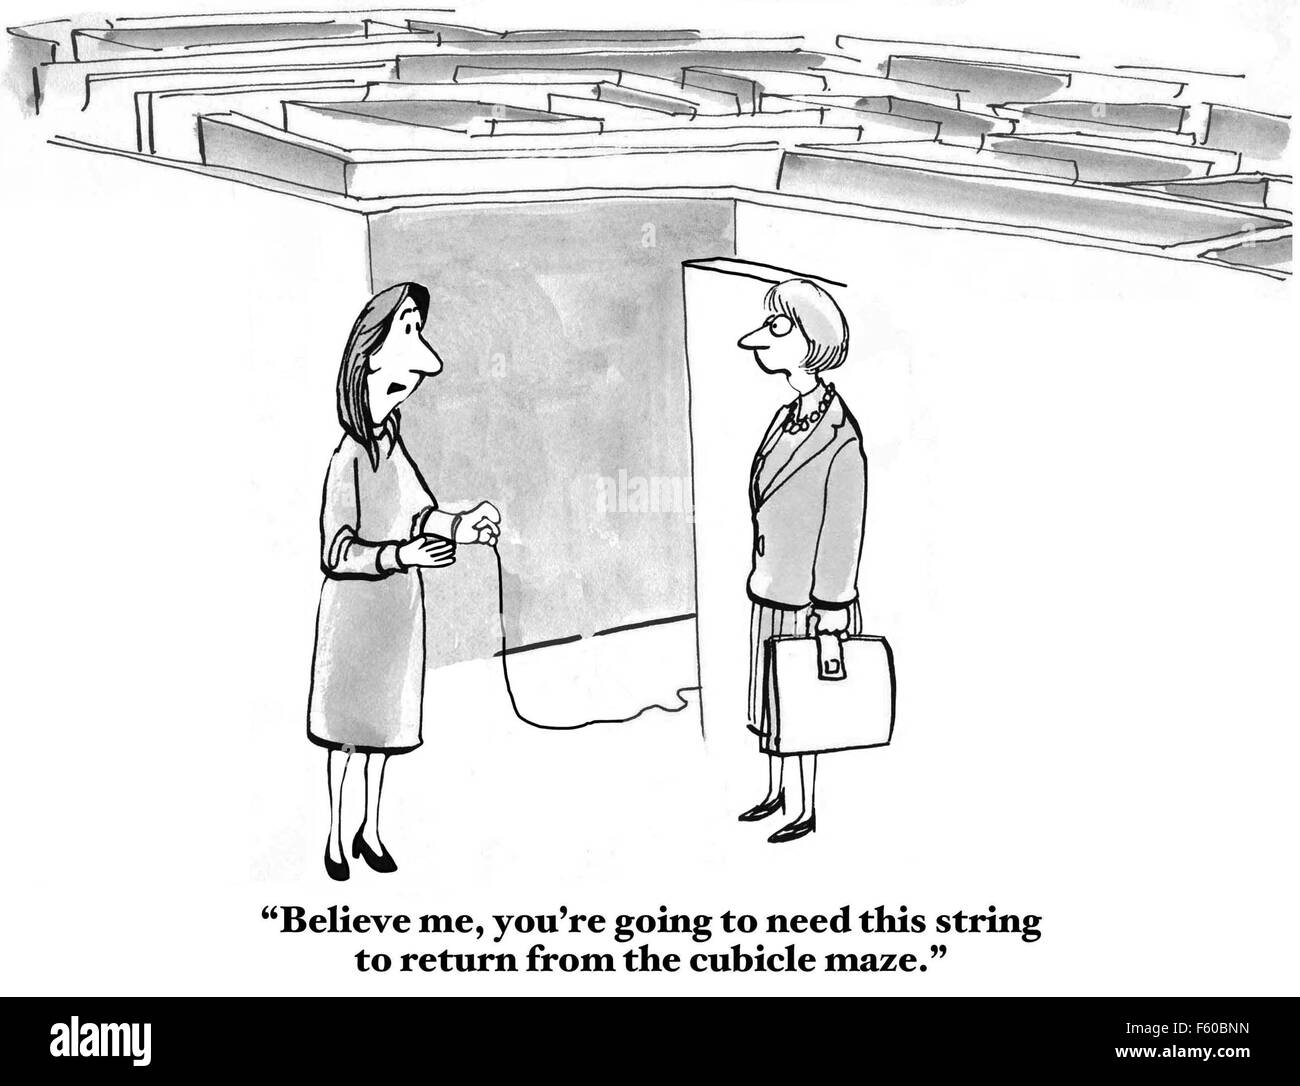 Business cartoon of two women, '...you're going to need this string to return from the cubicle maze'. Stock Photo